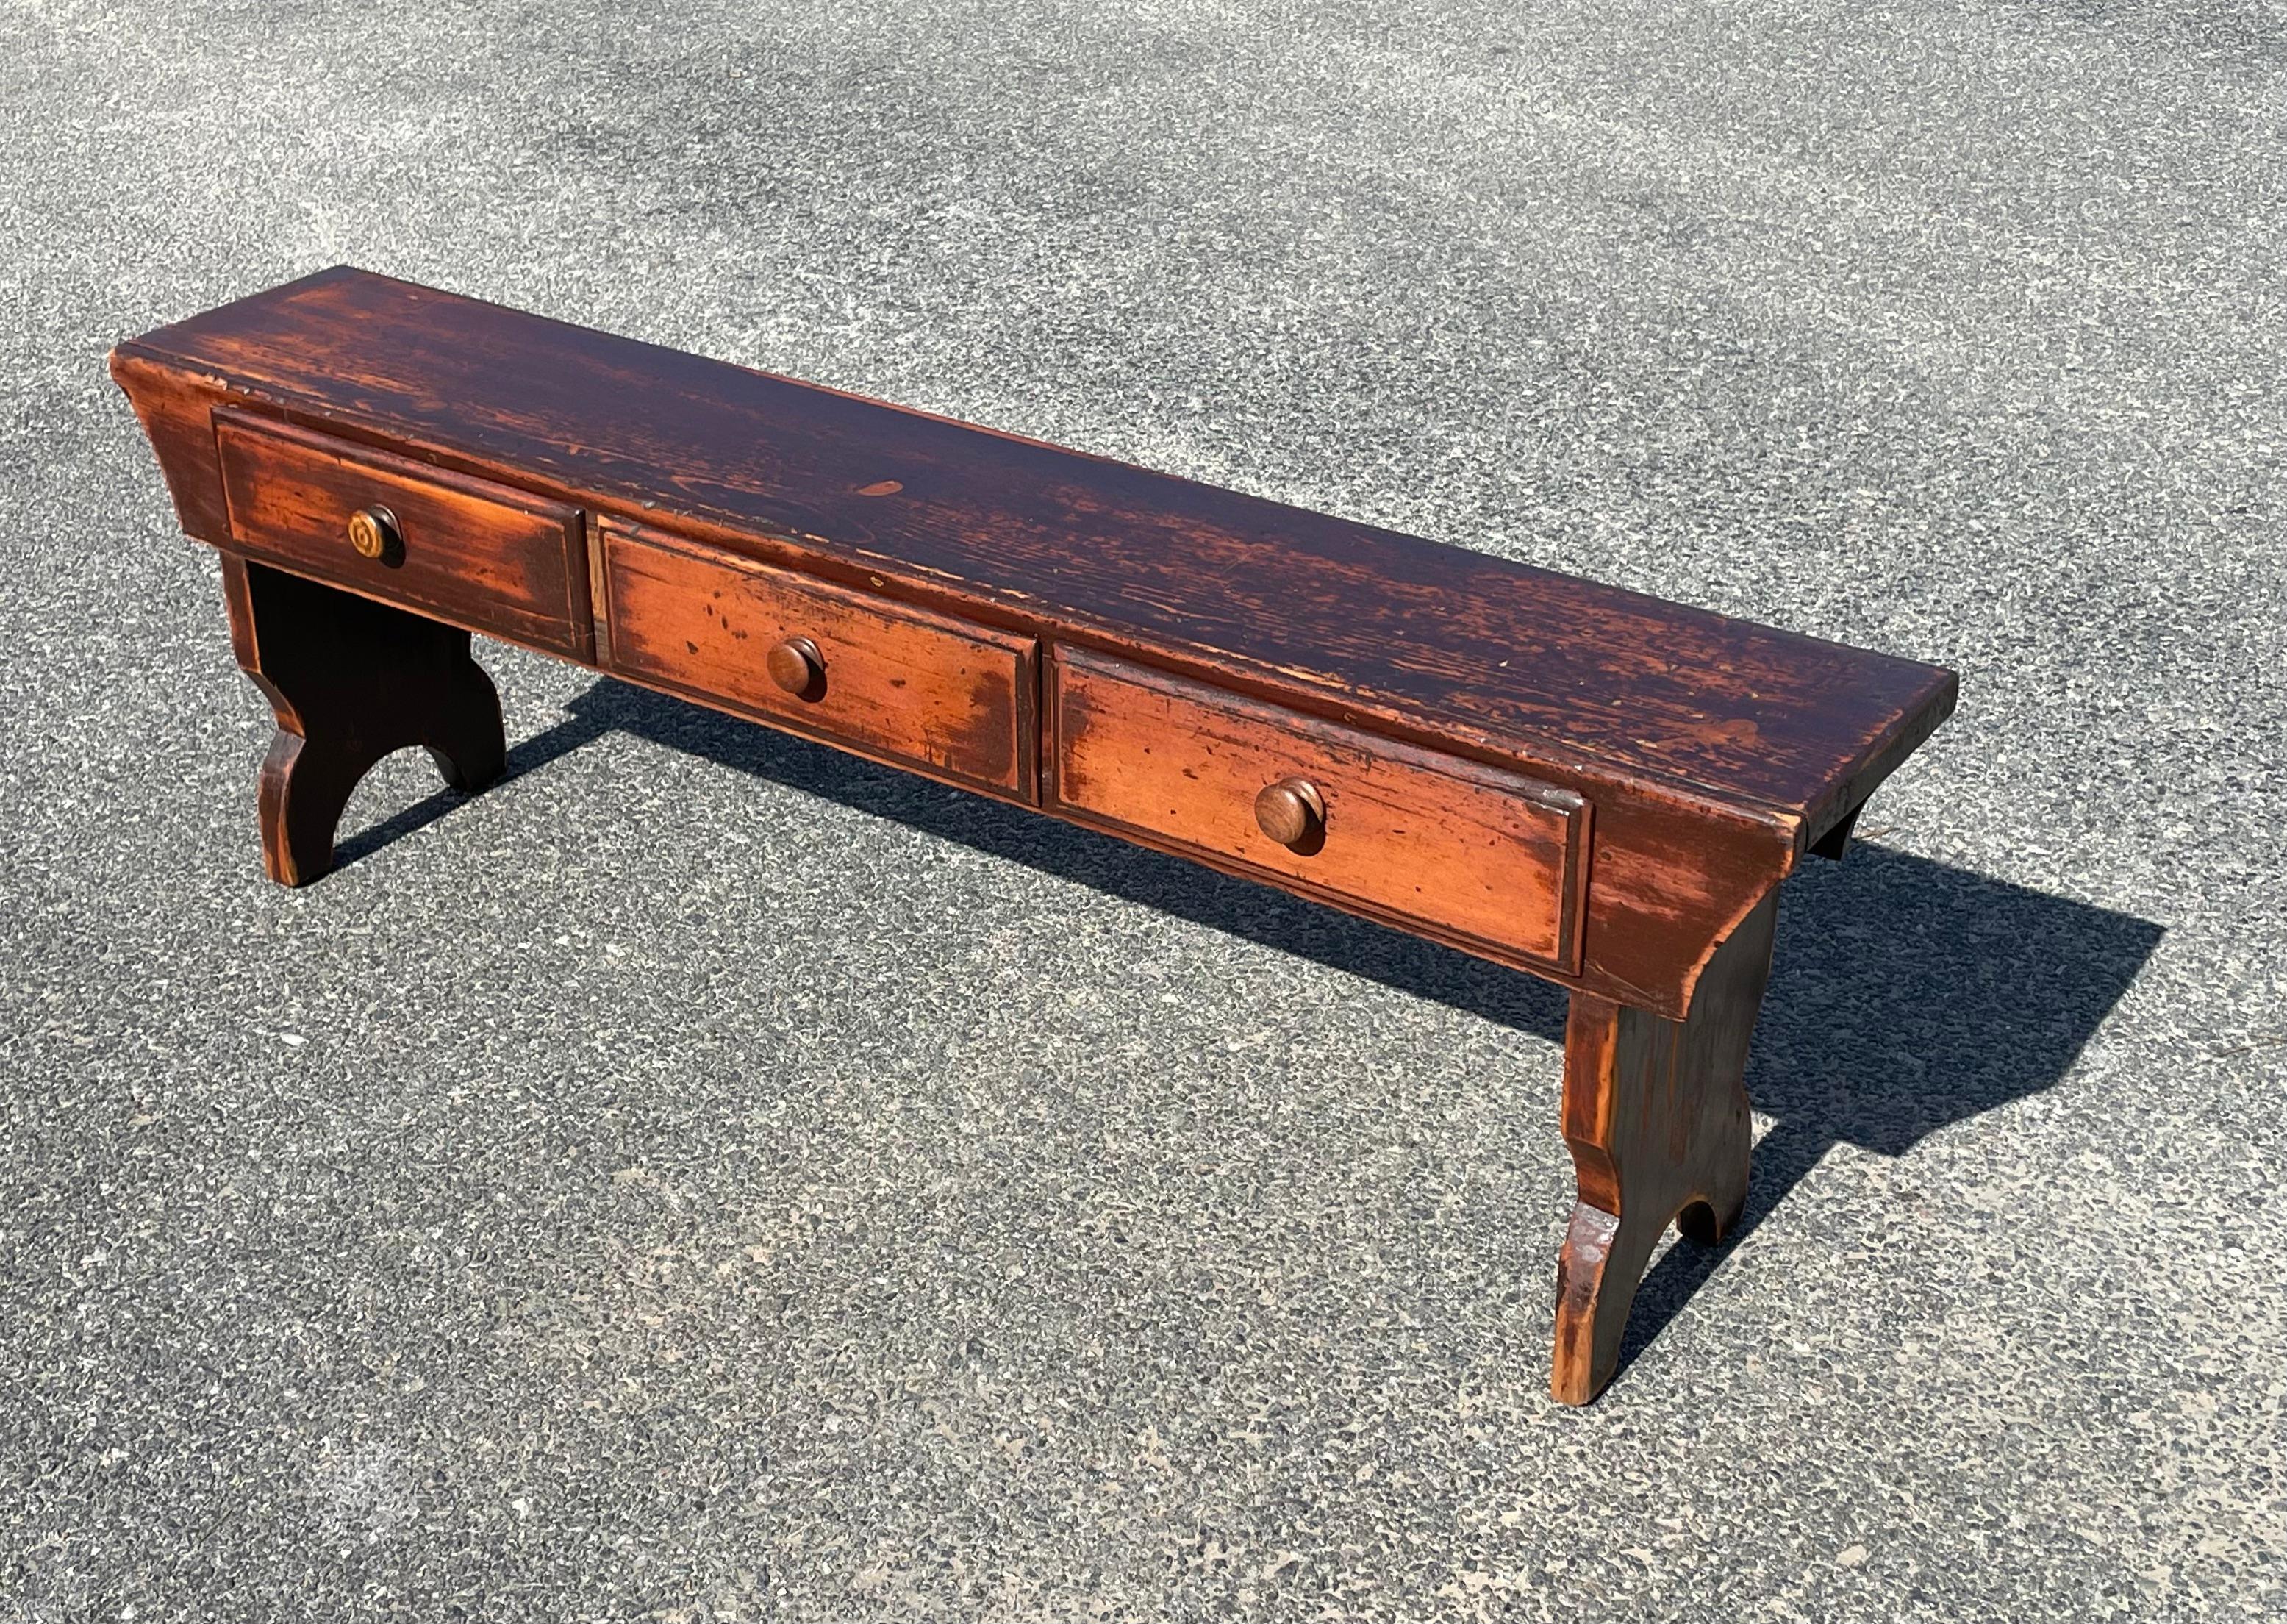 19th century pine bench in early brown paint.  With three drawers and bootjack legs.  